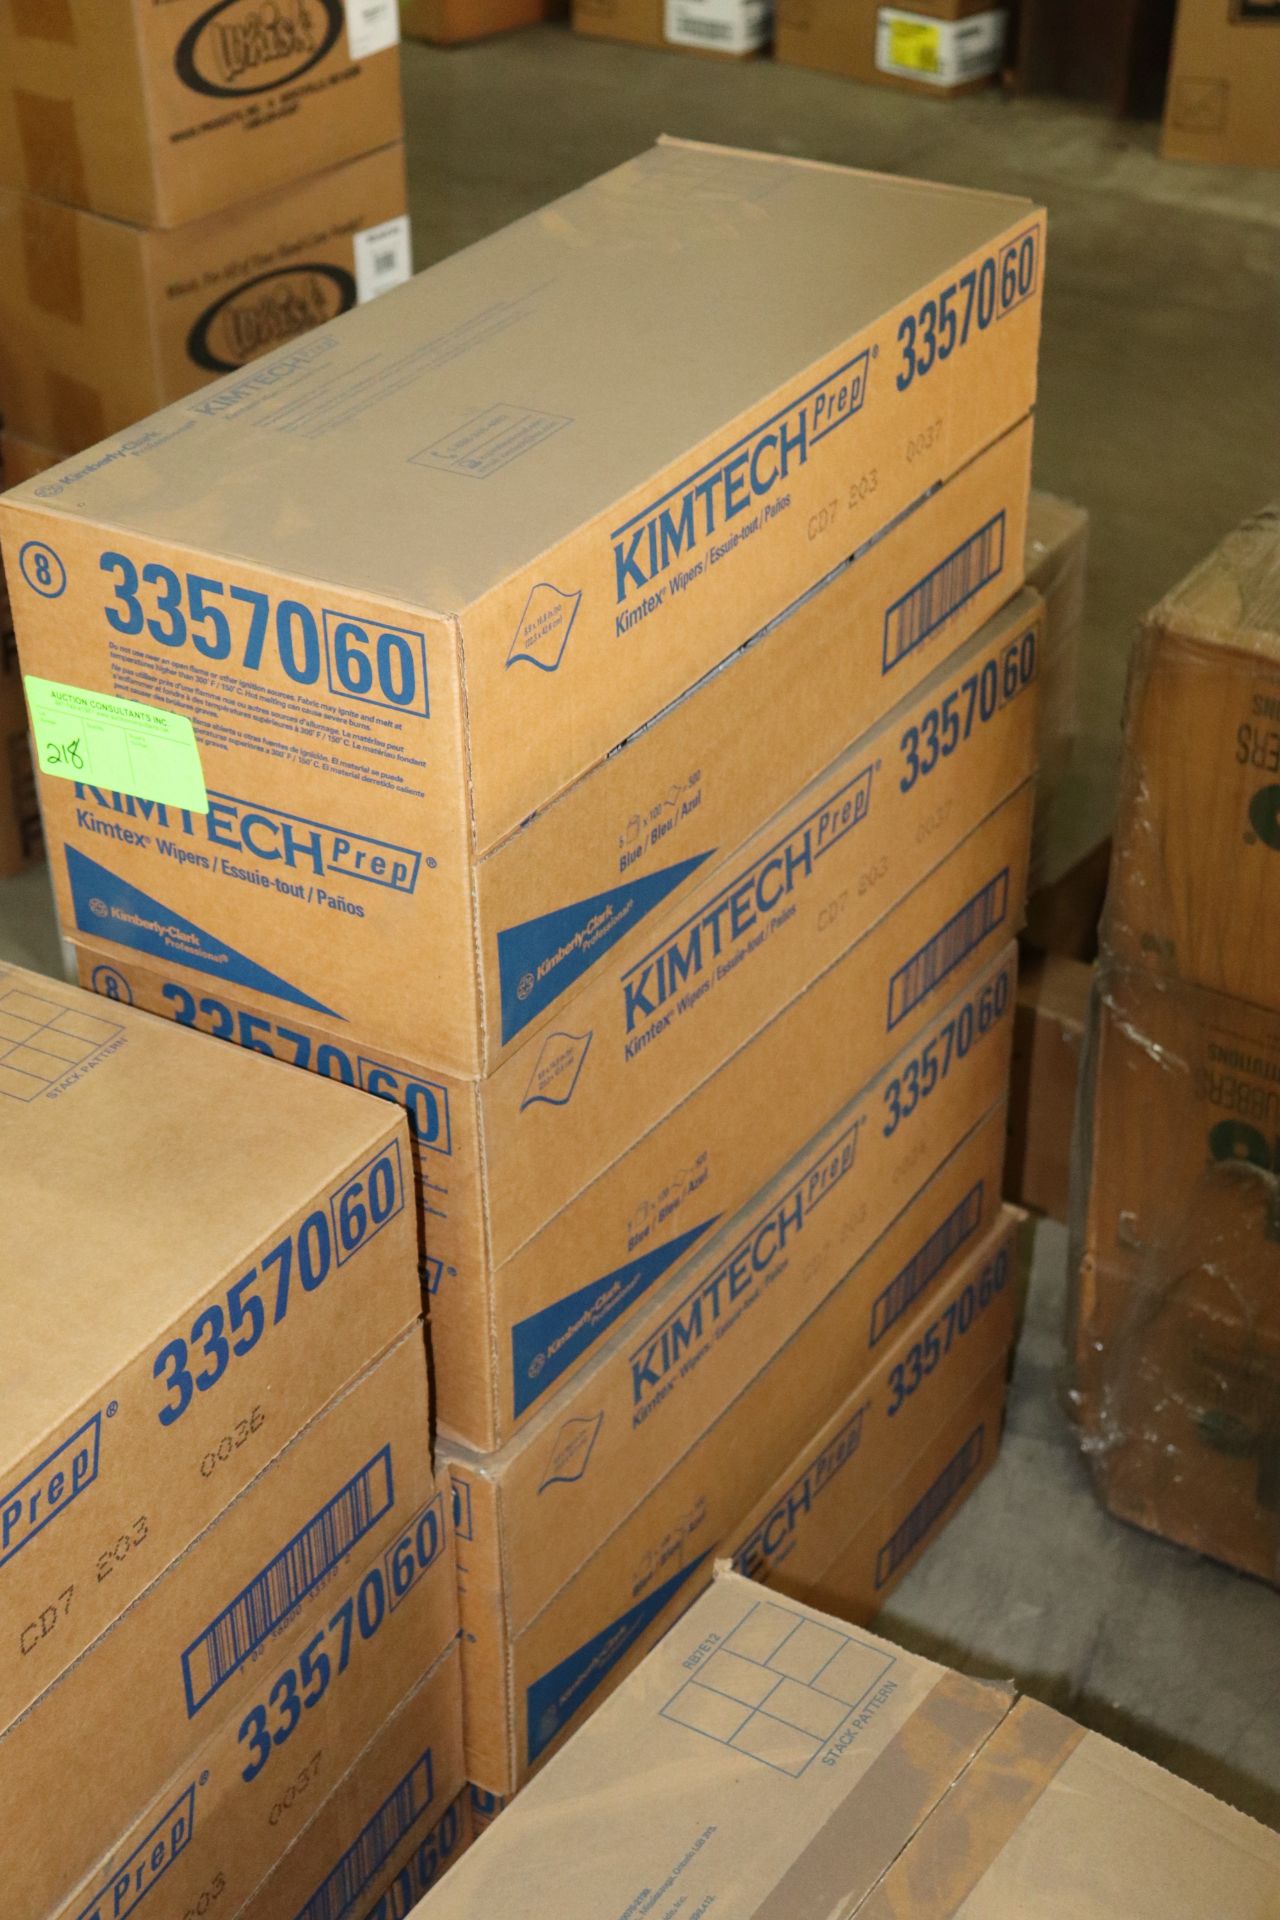 Four cases of Kimtech Prep wipers, five boxes per case